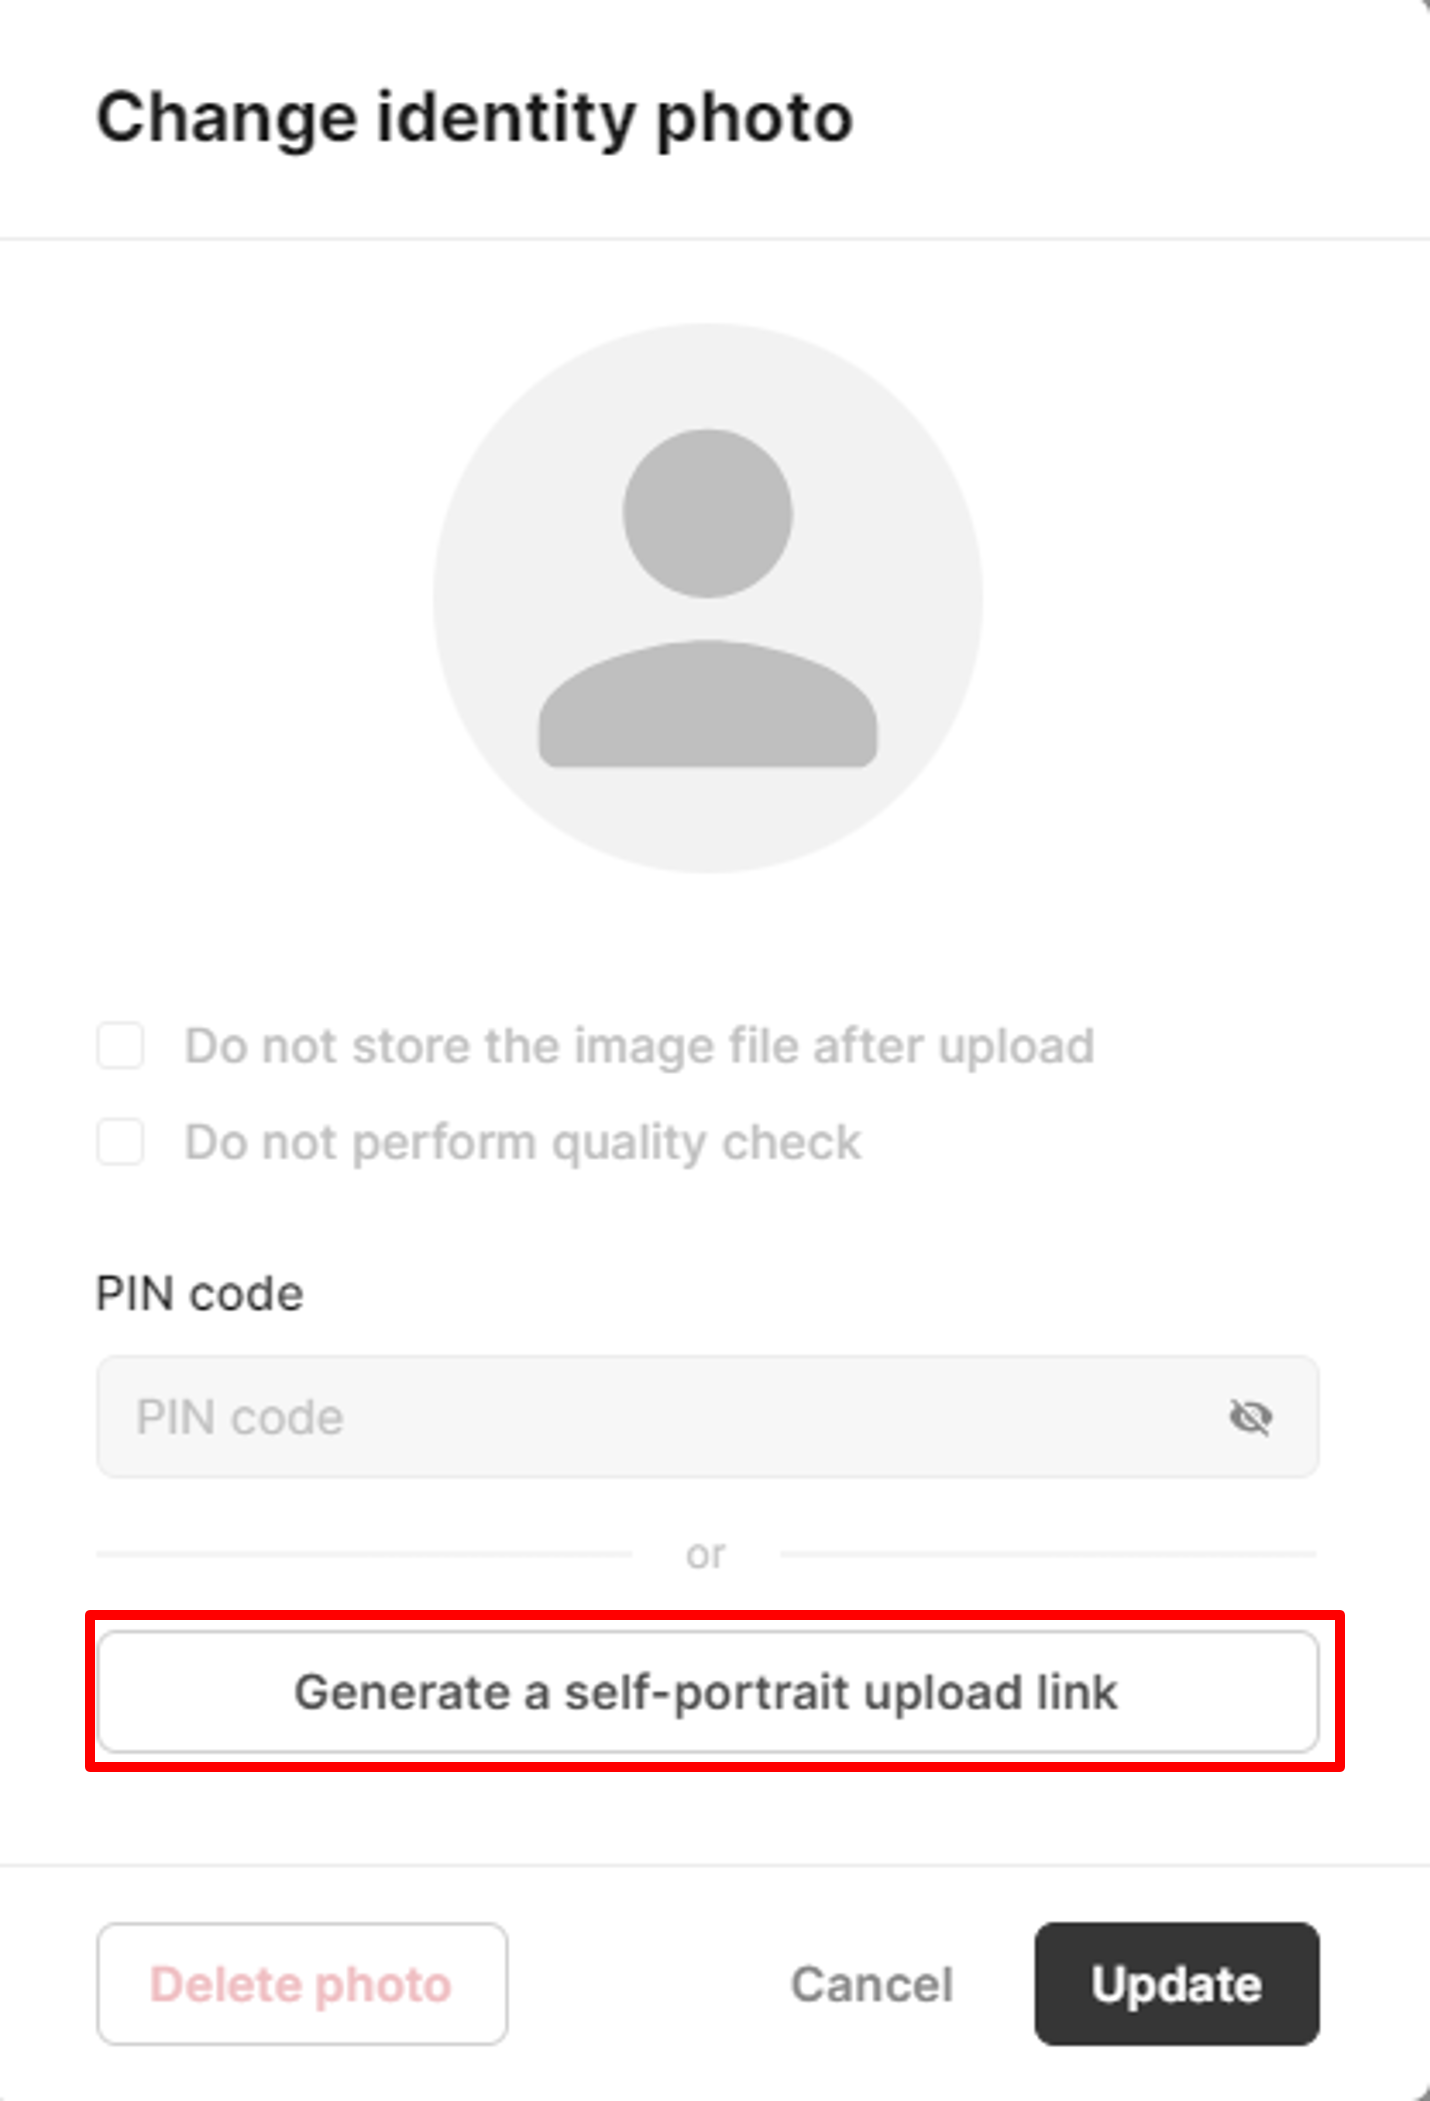 Generate the upload link